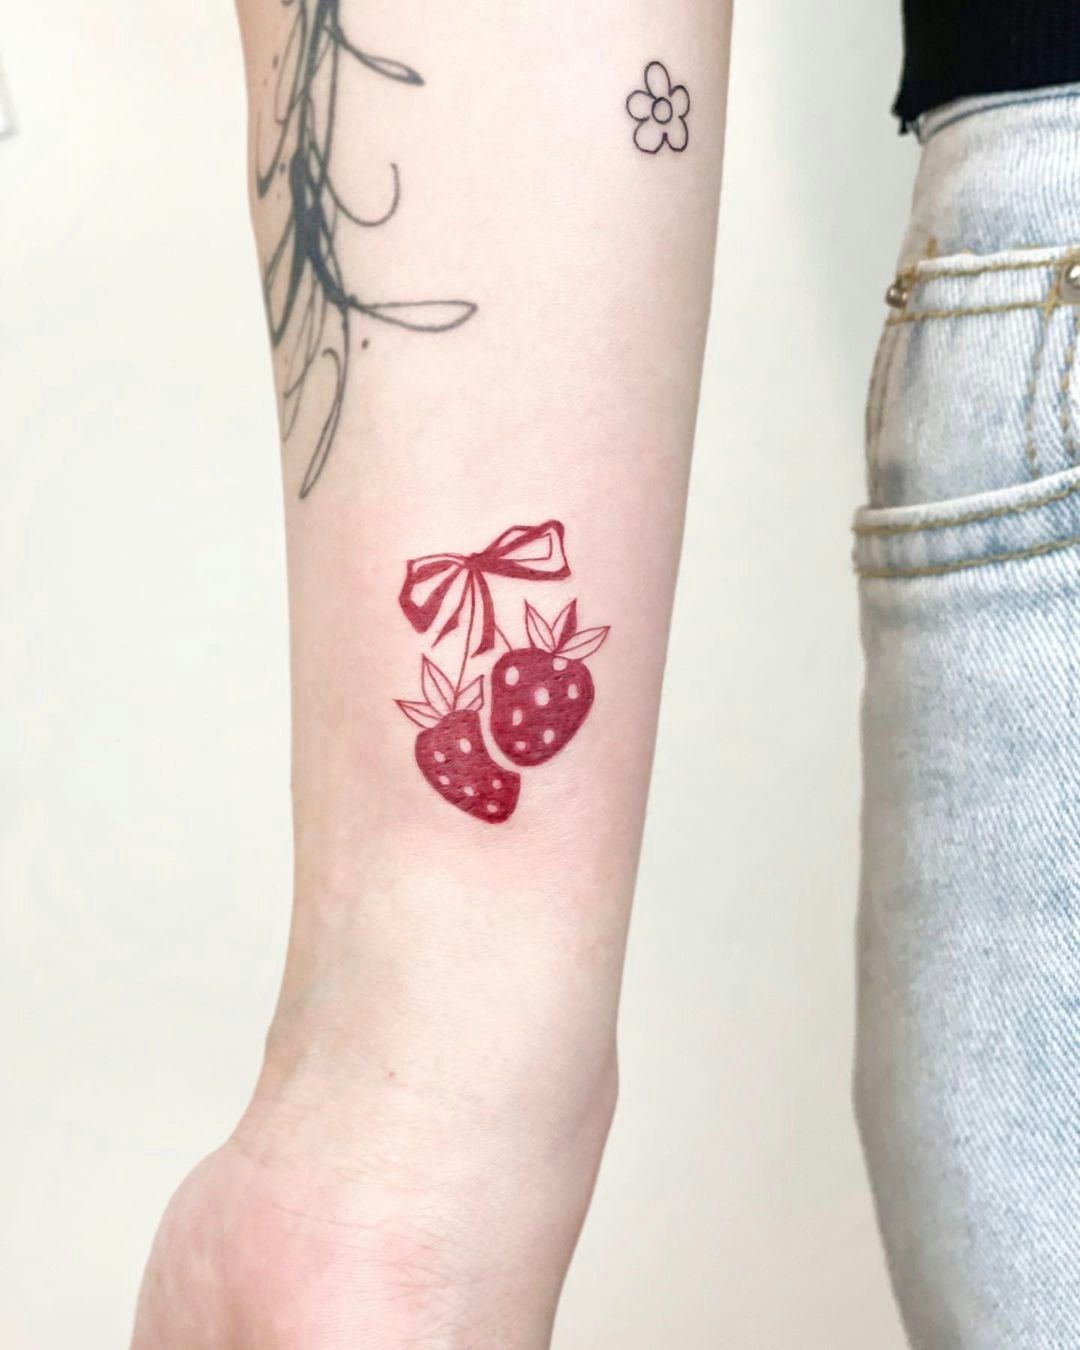 150 Refreshingly Vibrant Strawberry Tattoos To Wear Today